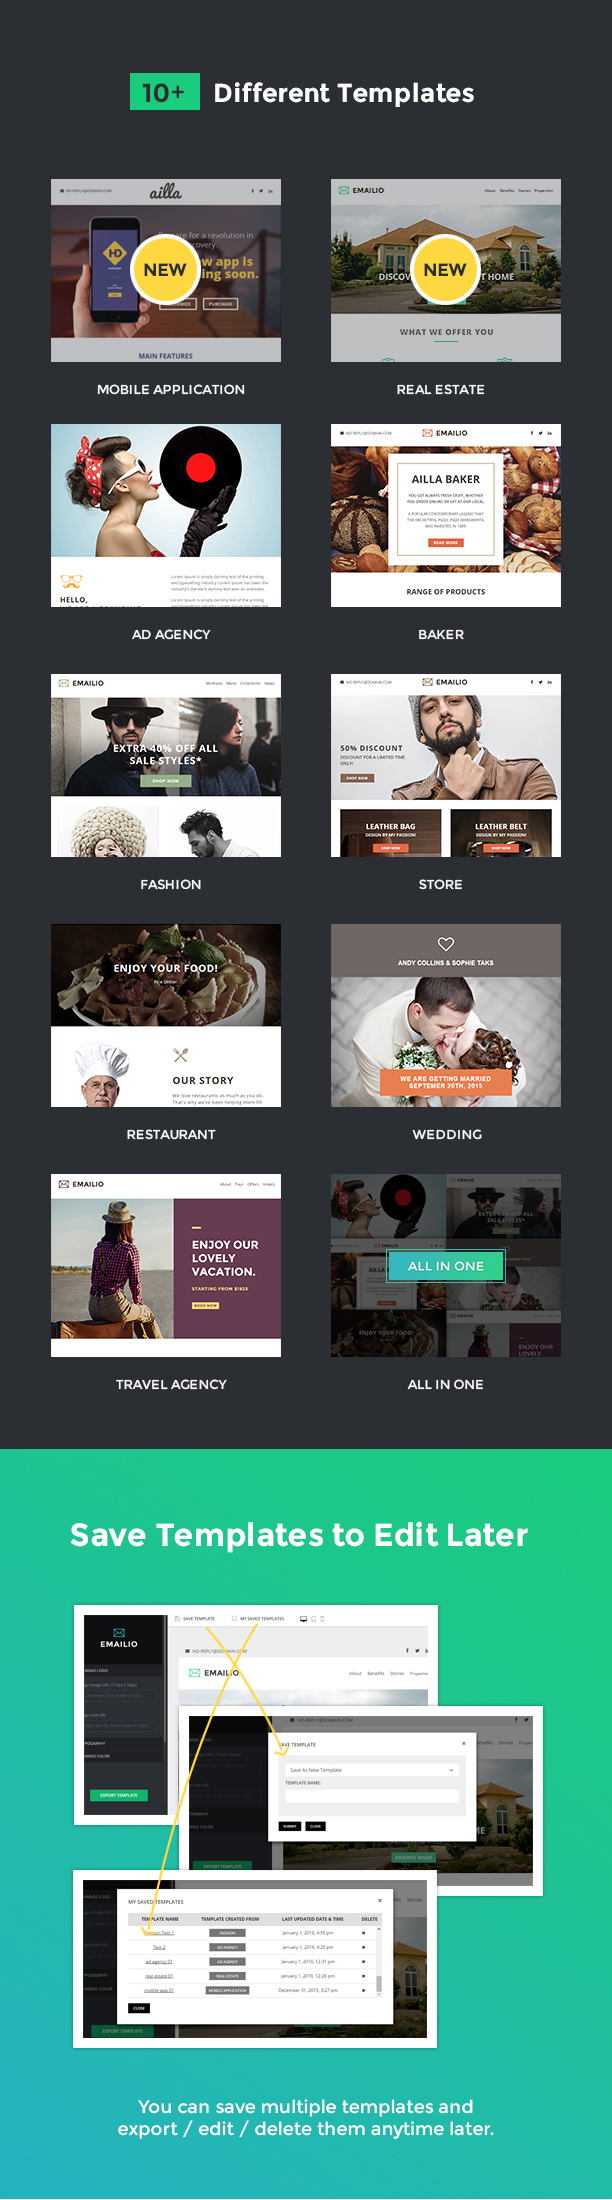 Emailio Responsive Multipurpose Email Template With Online Email Builder - 7